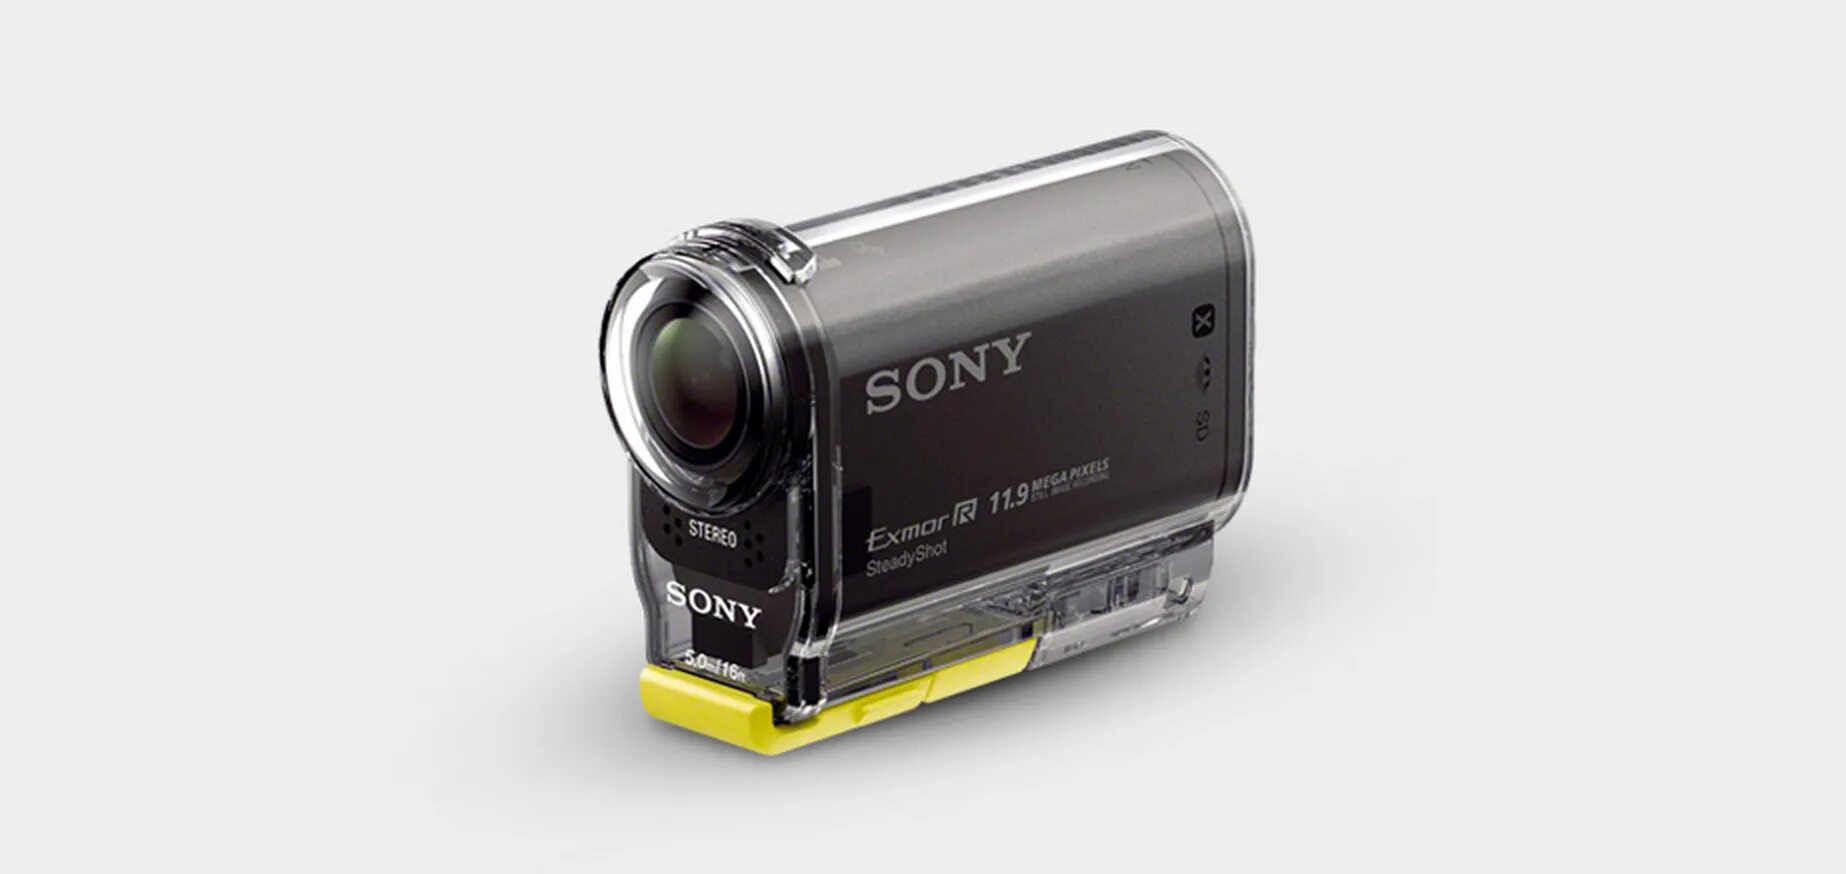 30 action. Sony Action cam 2020. Action камера Sony HDR-as30v. Sony HDR as30v. Sony Exmor r 11.9.